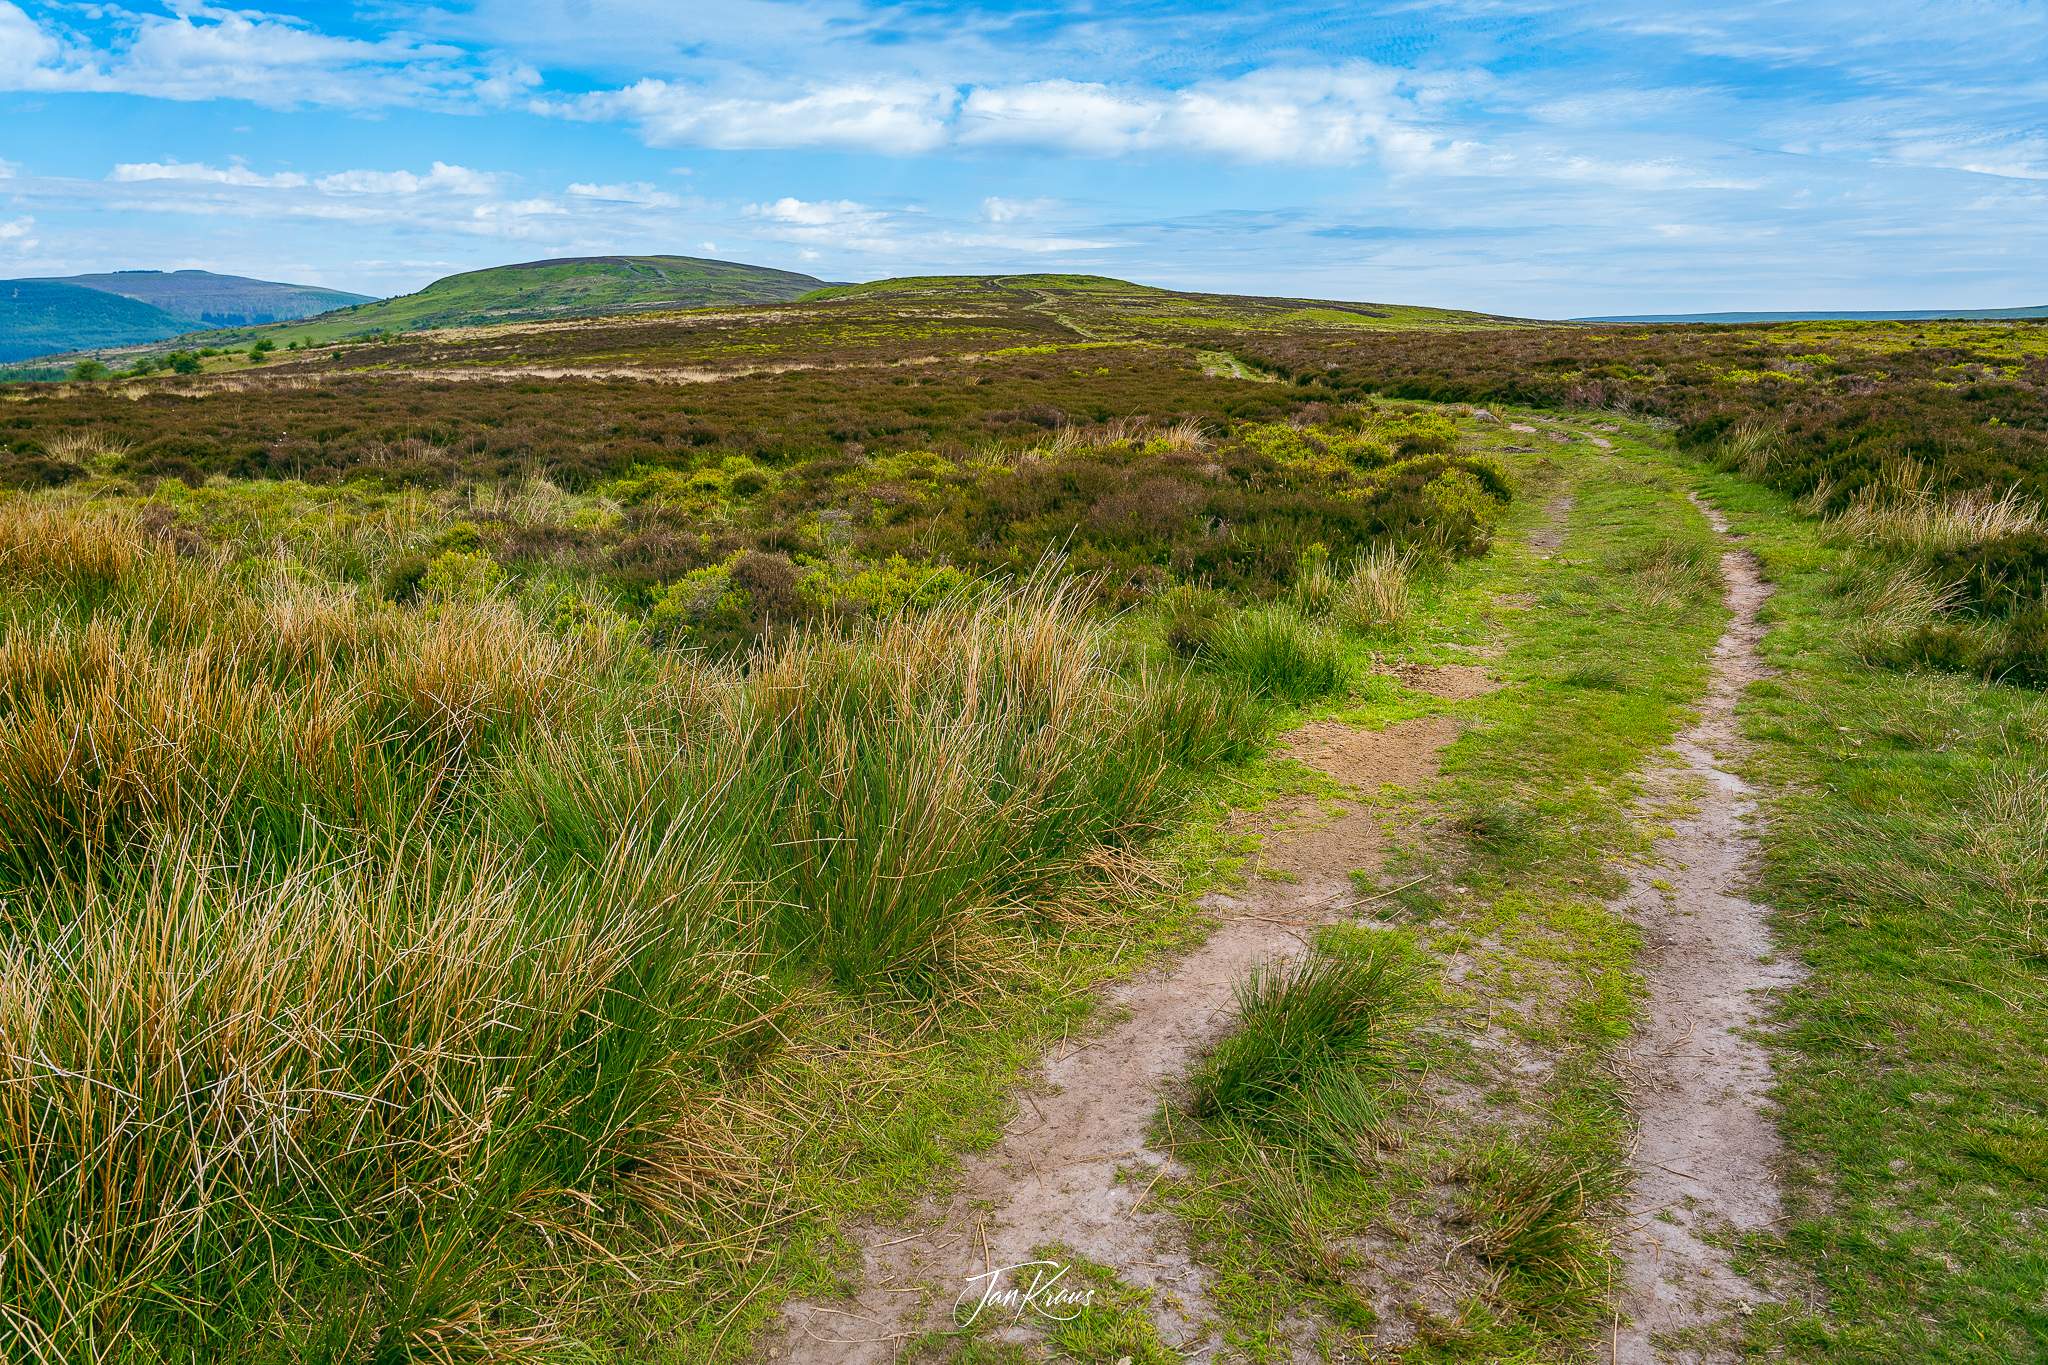 Some beautiful and peaceful views on the path at The Beacons Way, Wales, UK